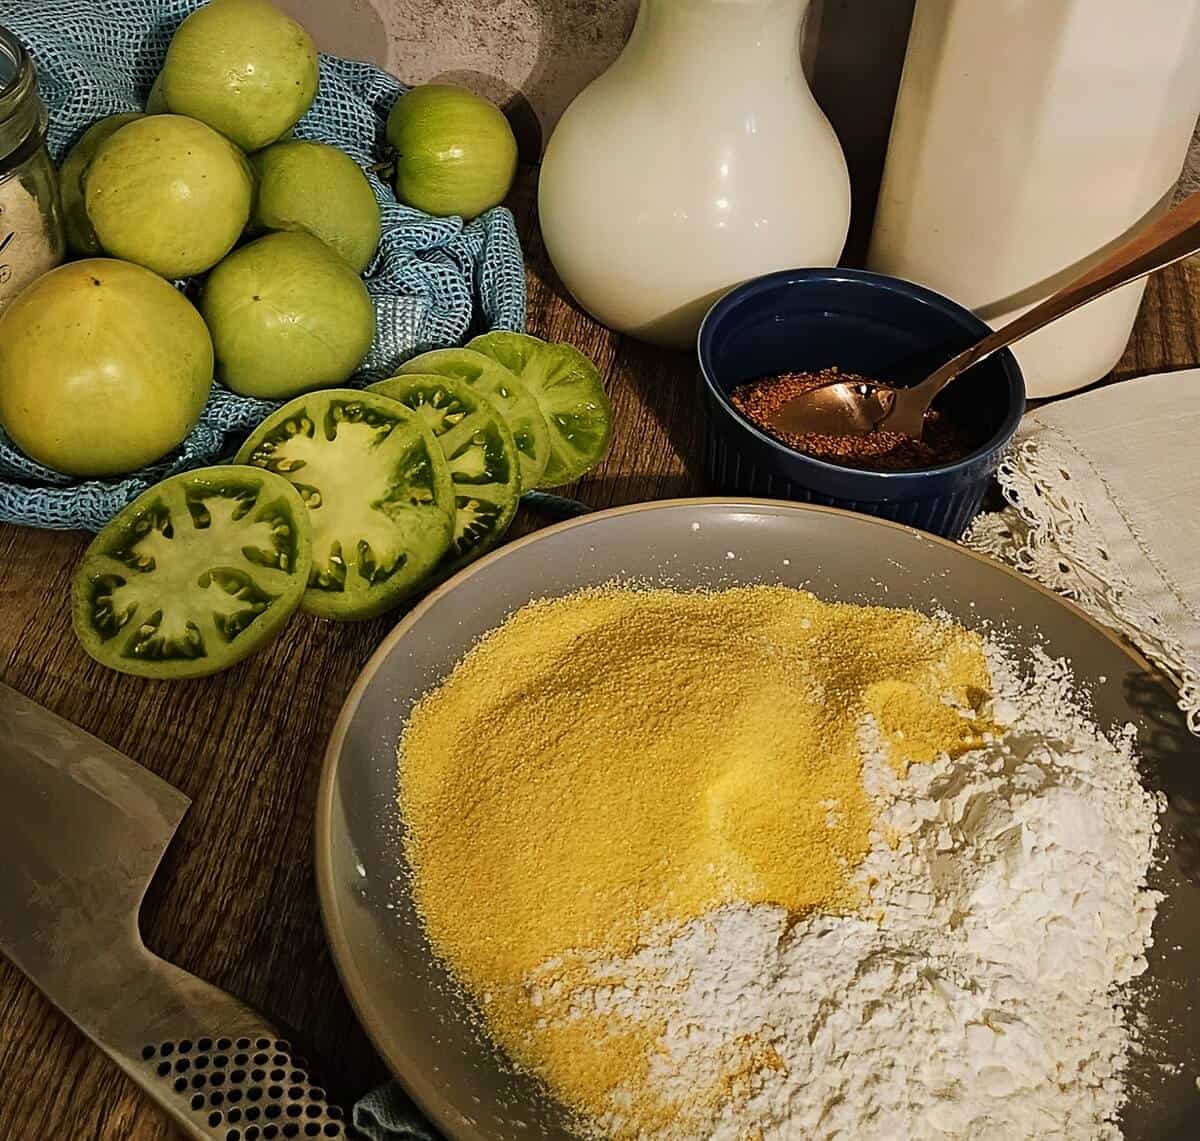 ingredients for fried green tomatoes; green tomatoes, both in whole and sliced form, blackening spice blend, corn starch and corn meal, buttermilk